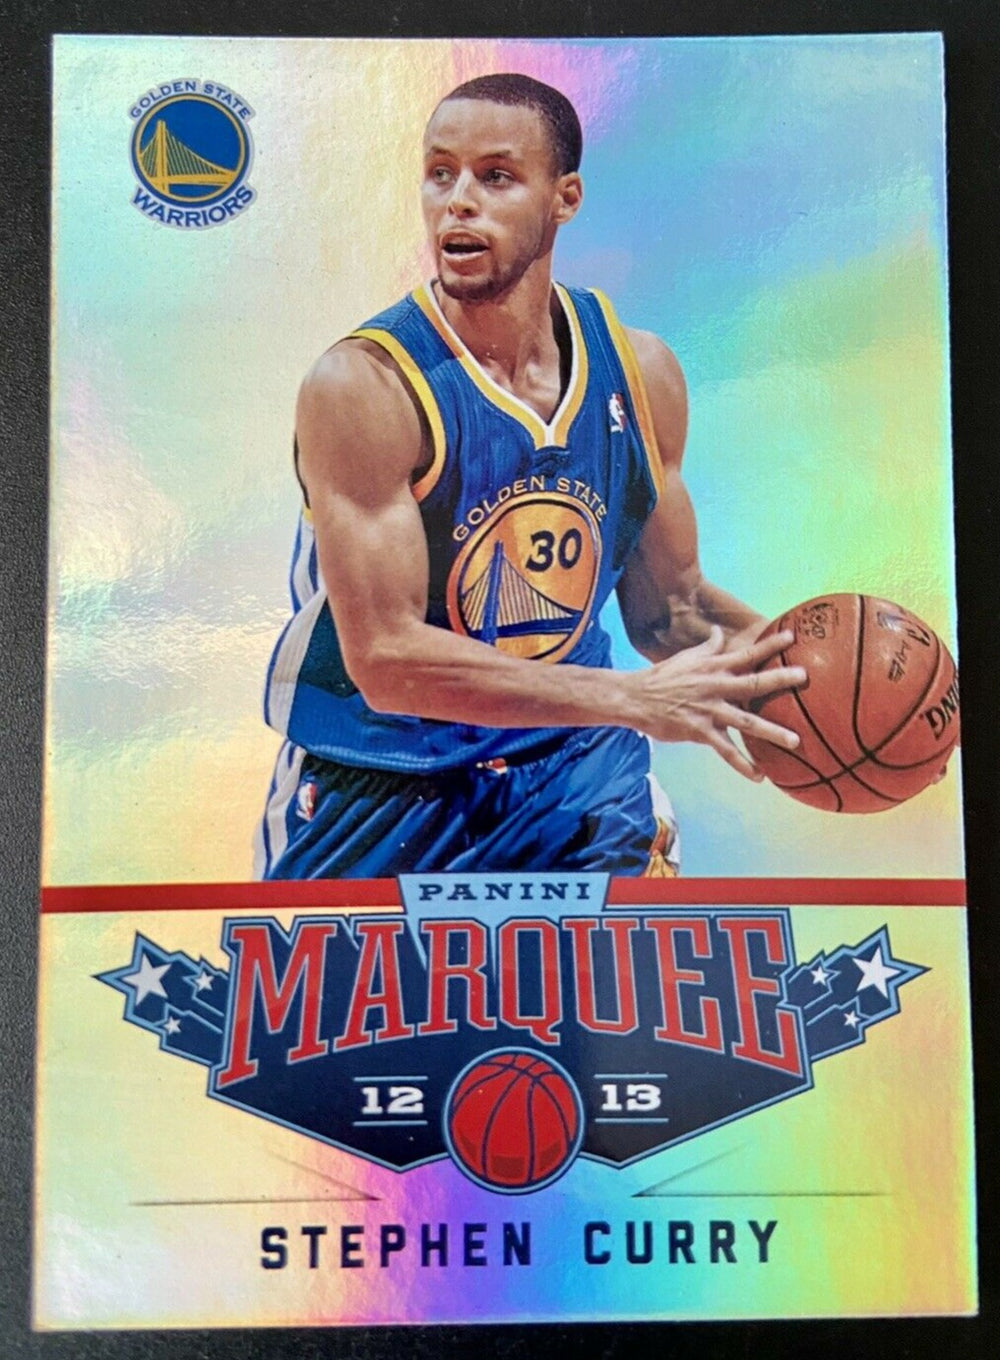 Stephen Curry 2012 2013 Panini Marquee Series Mint Card #33